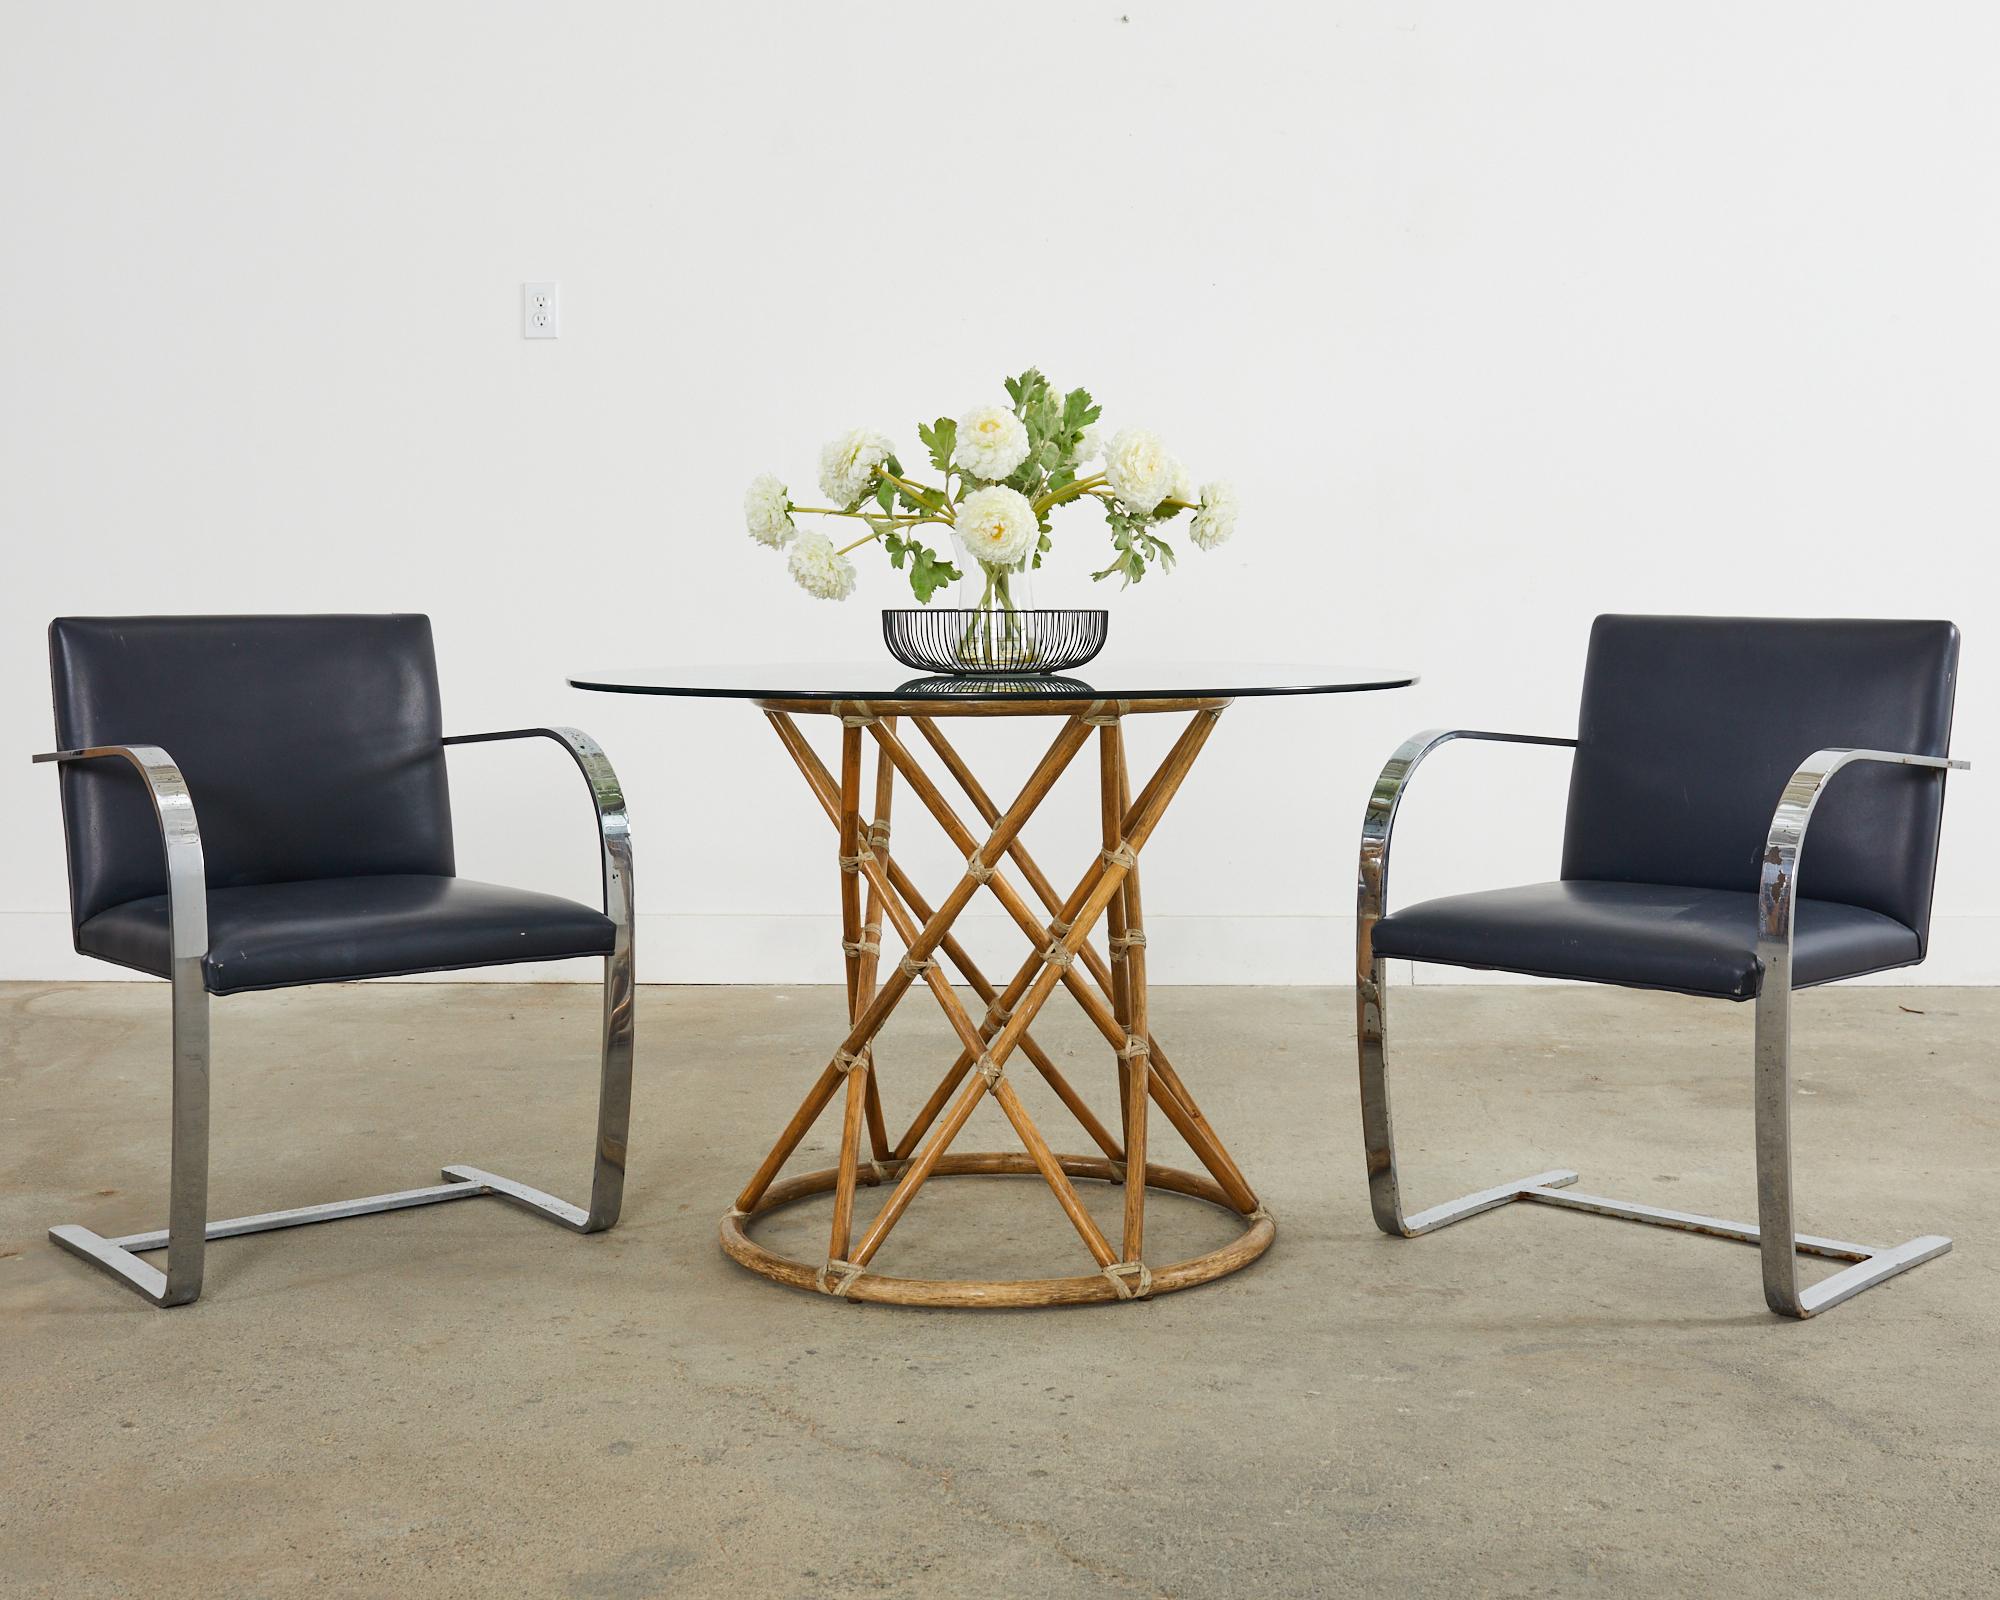 Mid-Century Modern pair of Mies van der Rohe for Knoll brno armchairs. The chairs feature a steel flat bar design with a chrome finish. The frames have navy blue leather seat covers. Knoll order tags on the bottoms of the seats. The chrome finish is